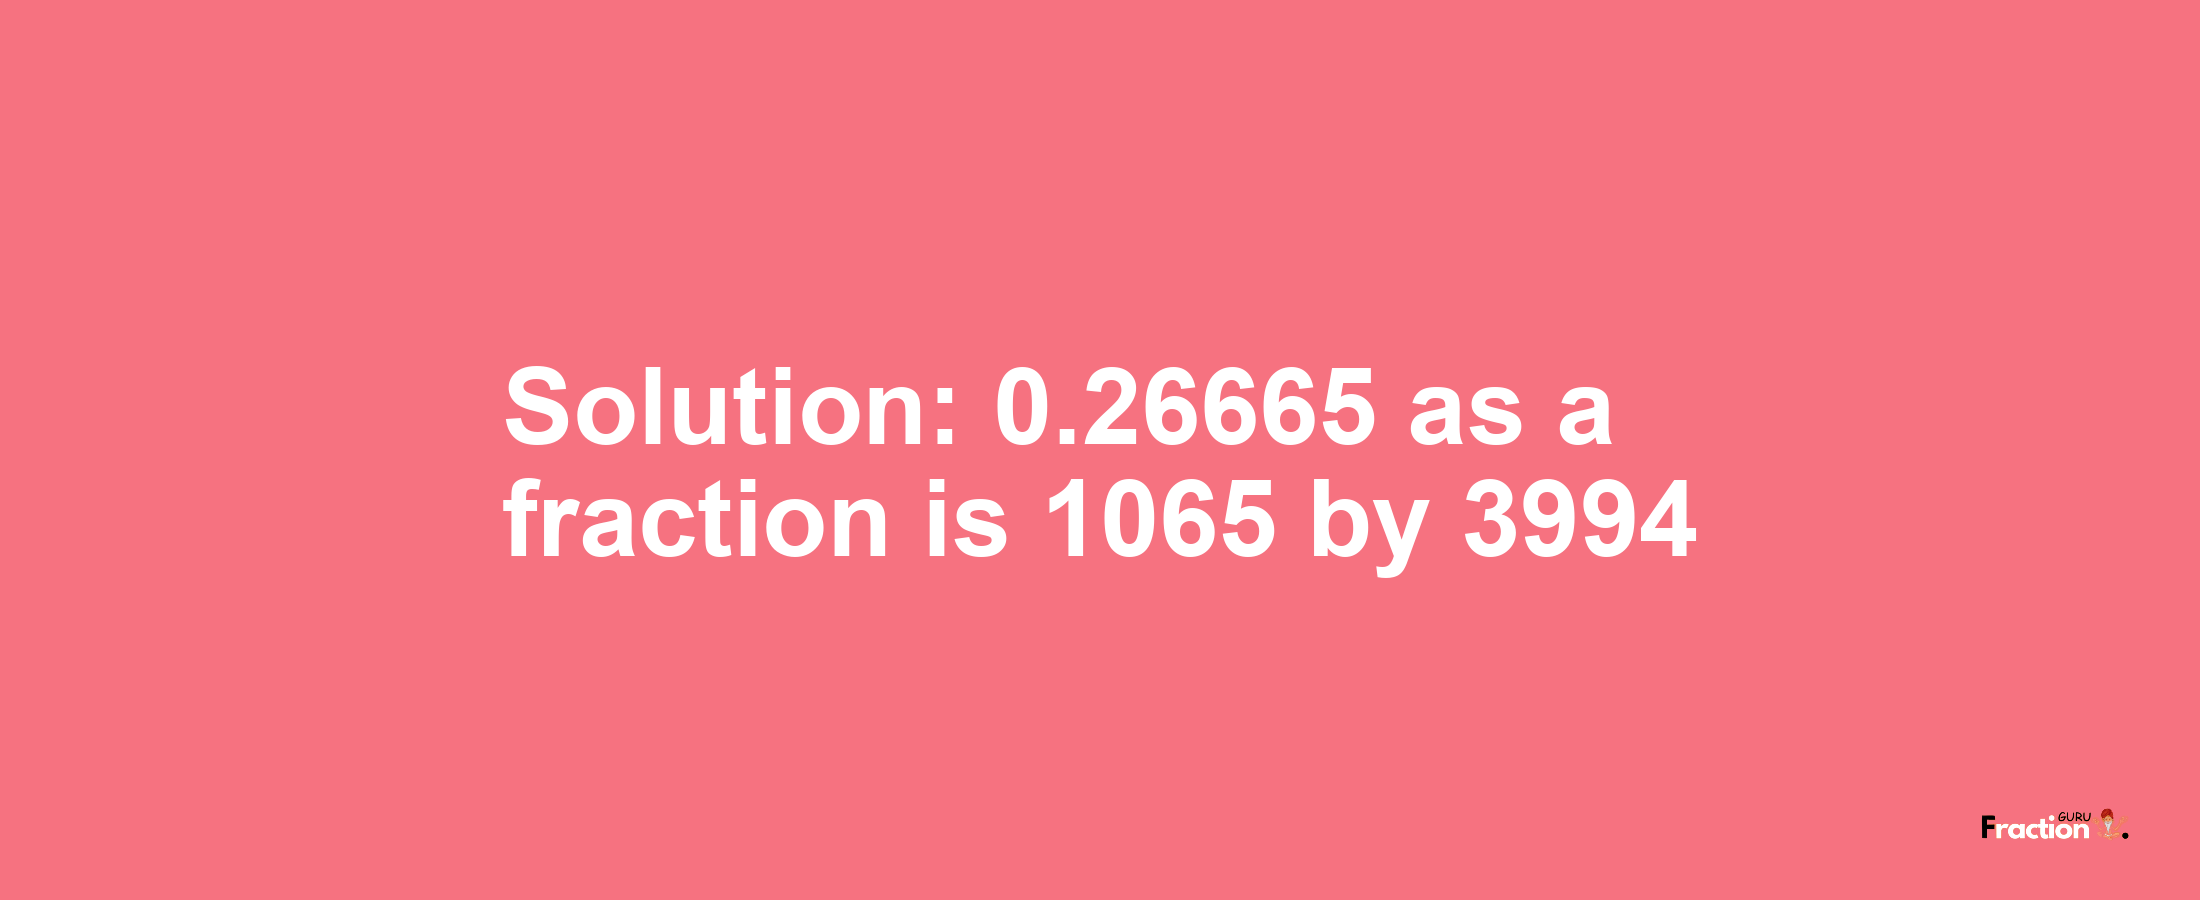 Solution:0.26665 as a fraction is 1065/3994